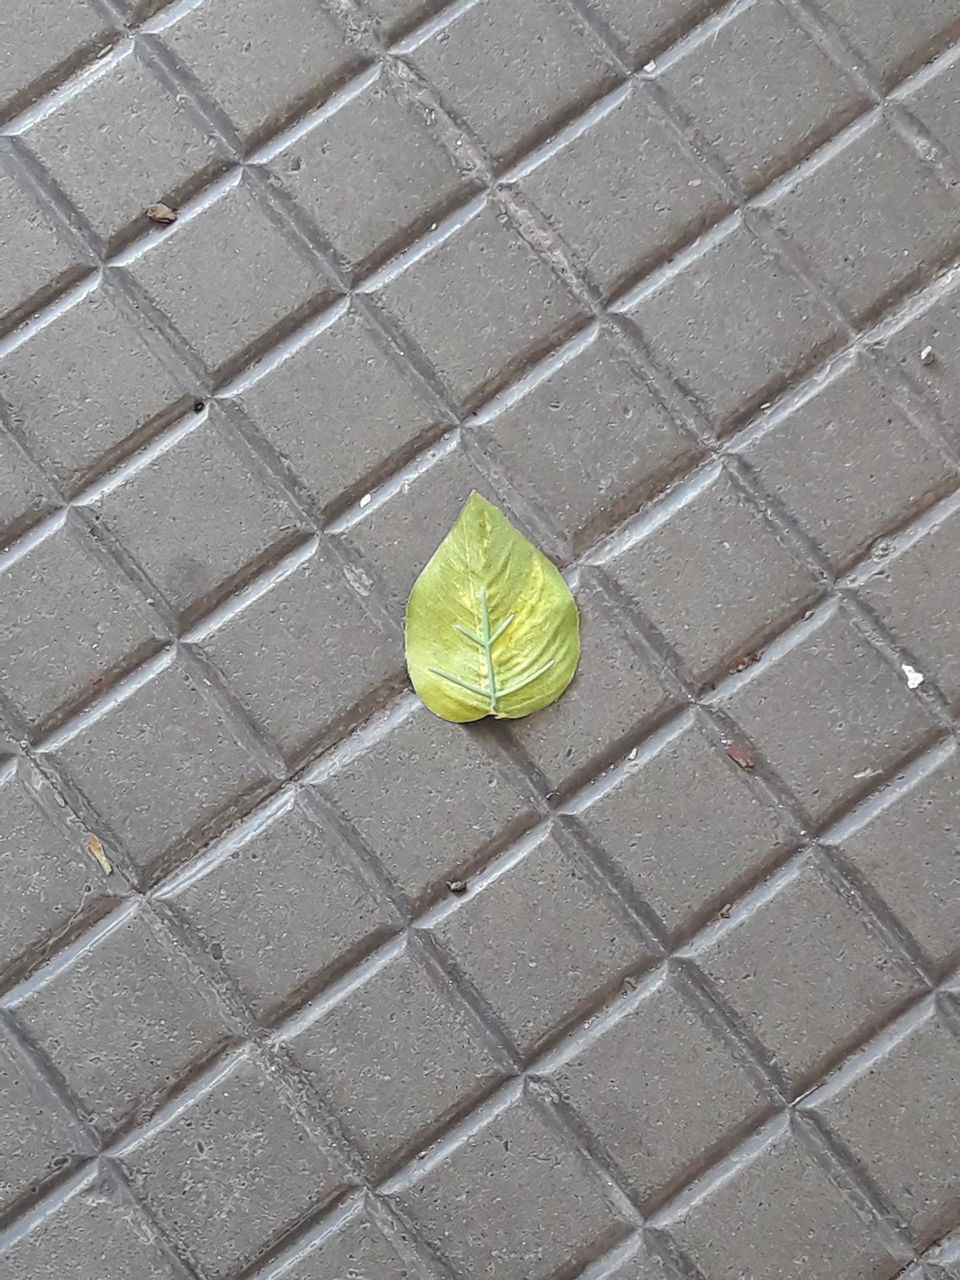 HIGH ANGLE VIEW OF YELLOW UMBRELLA ON FOOTPATH